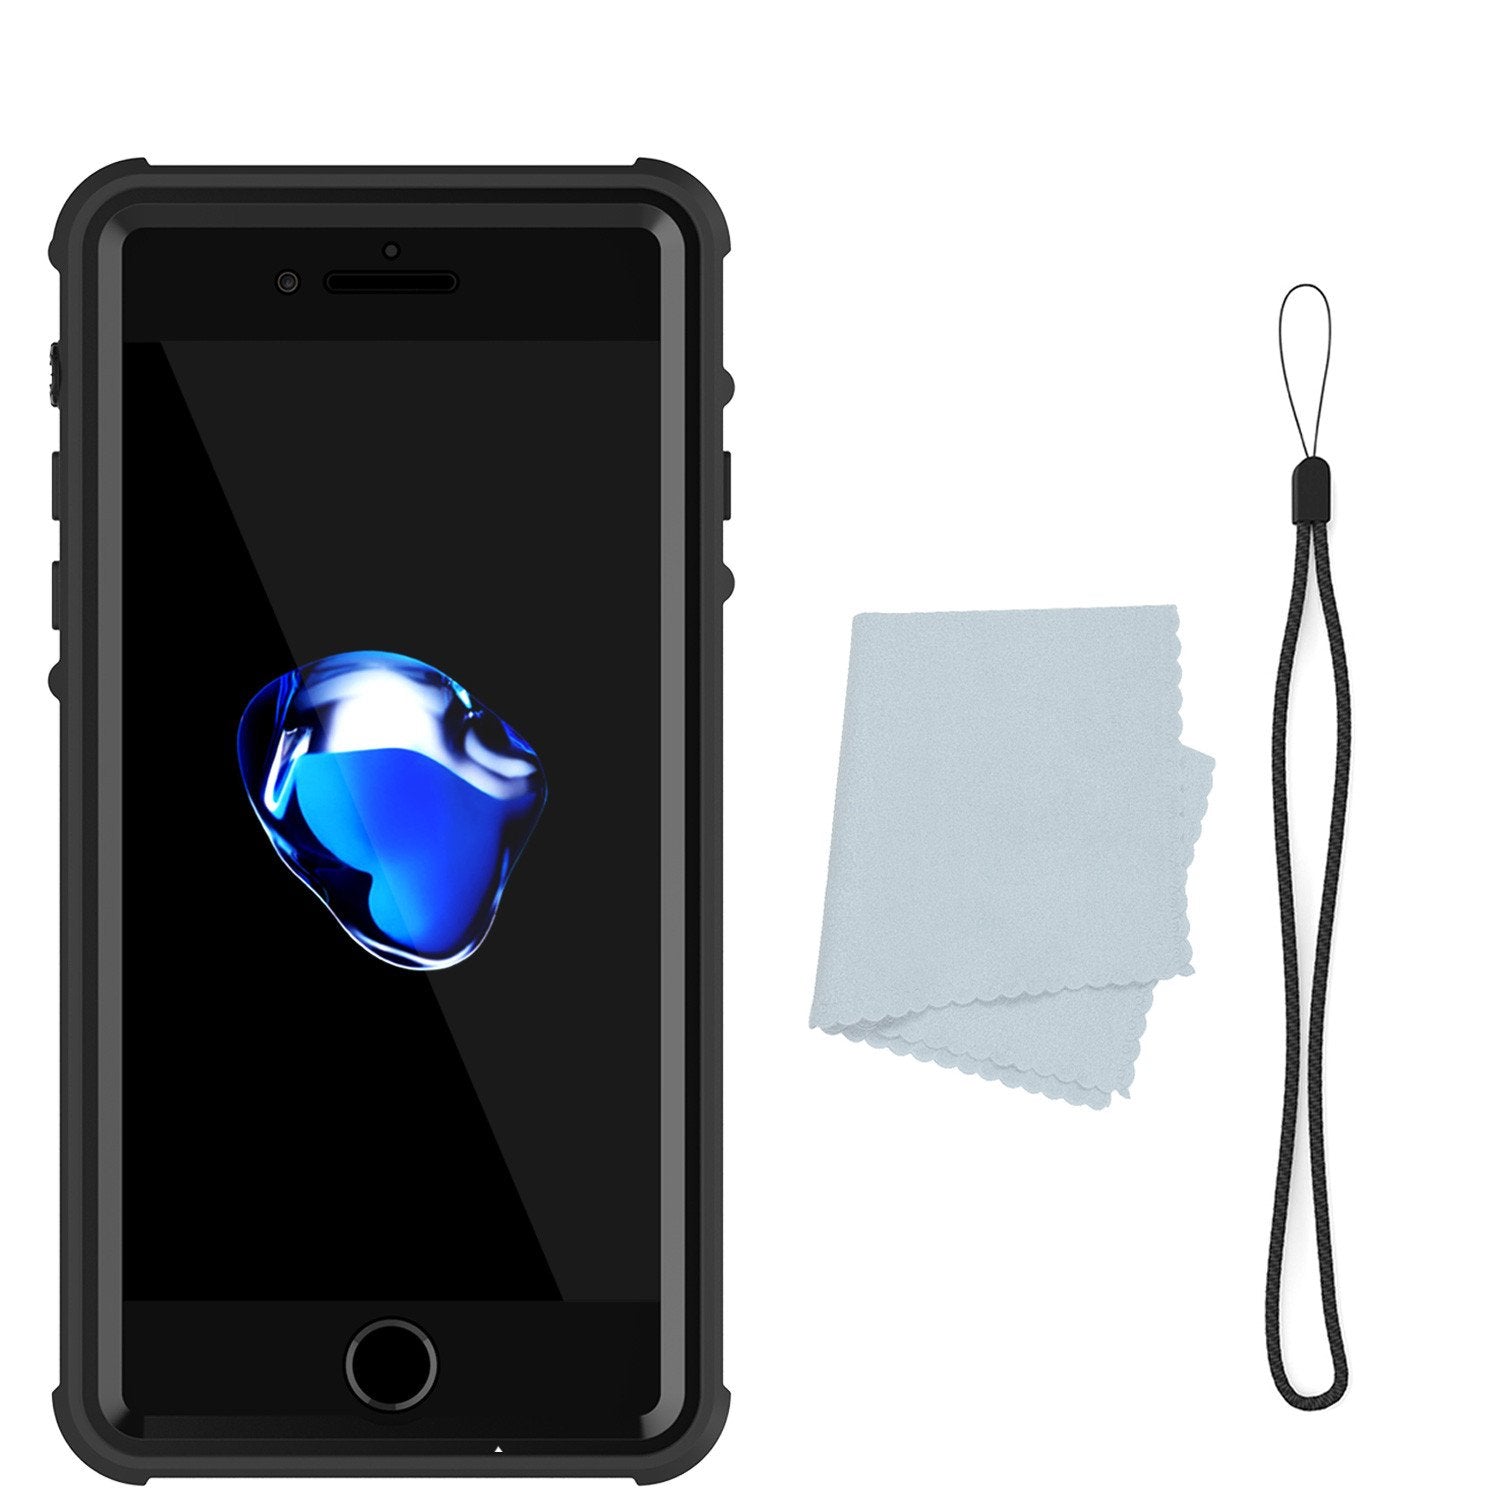 iPhone 7+ Plus Waterproof Case, PUNKcase CRYSTAL Black W/ Attached Screen Protector  | Warranty - PunkCase NZ